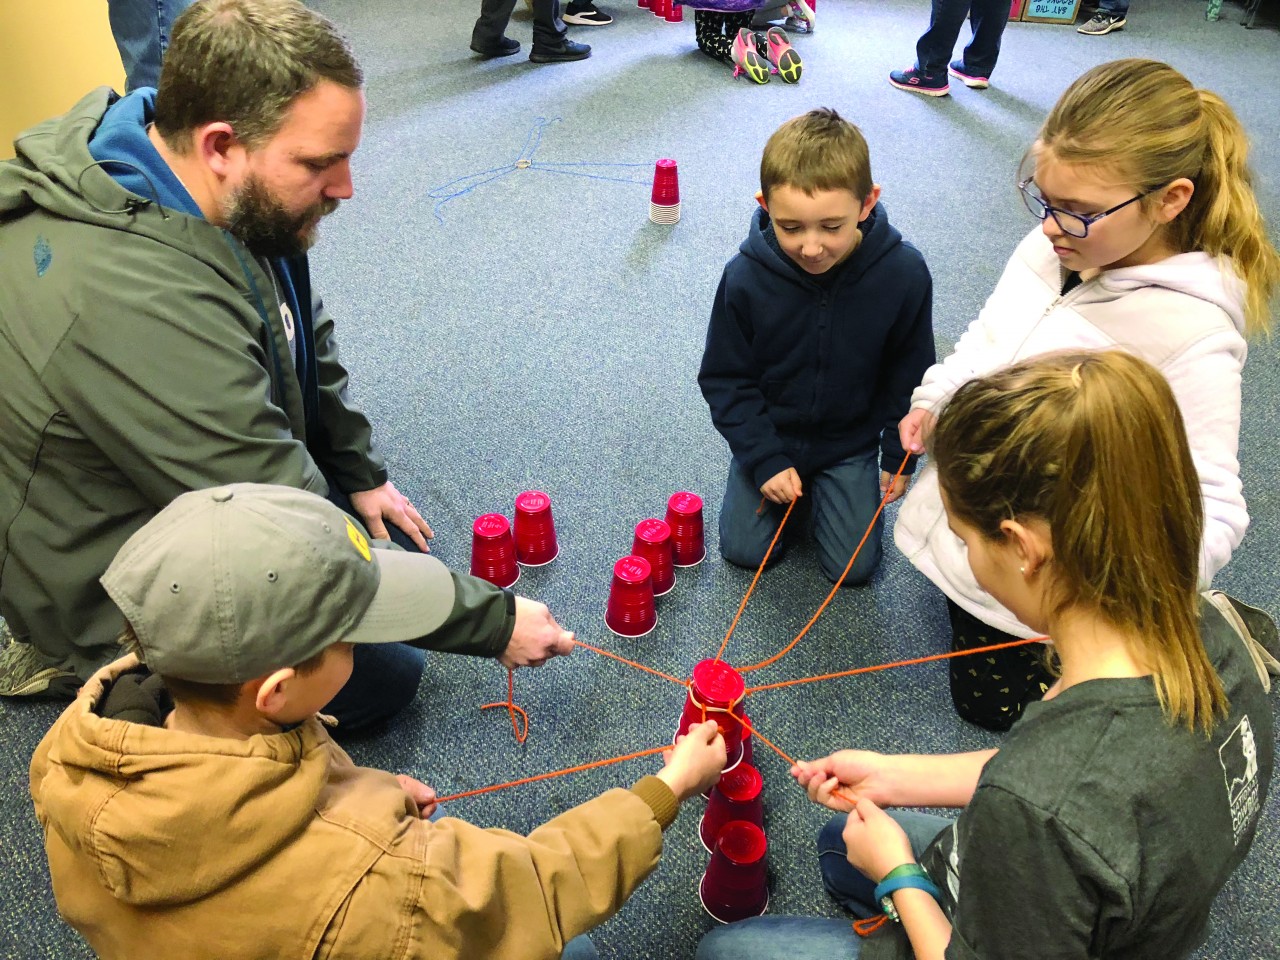 Mission Ignition fires kids’ imaginations for missions - Baptist Messenger of Oklahoma 1